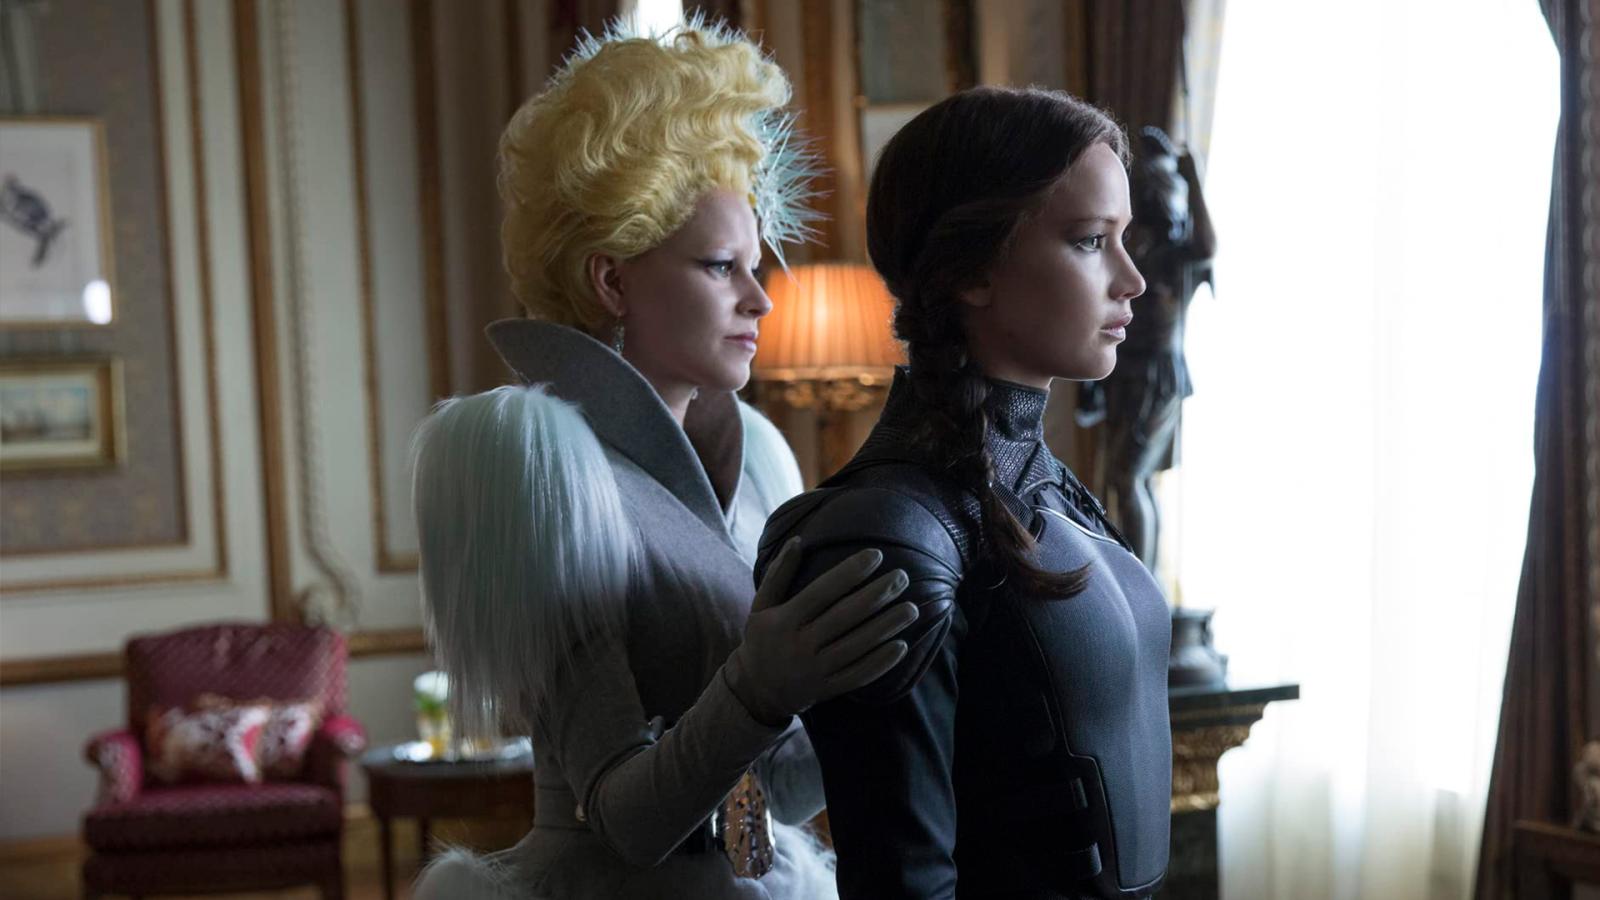 Jennifer Lawrence Might Return as Katniss Everdeen Despite Hunger Games Movies Being Over - image 1